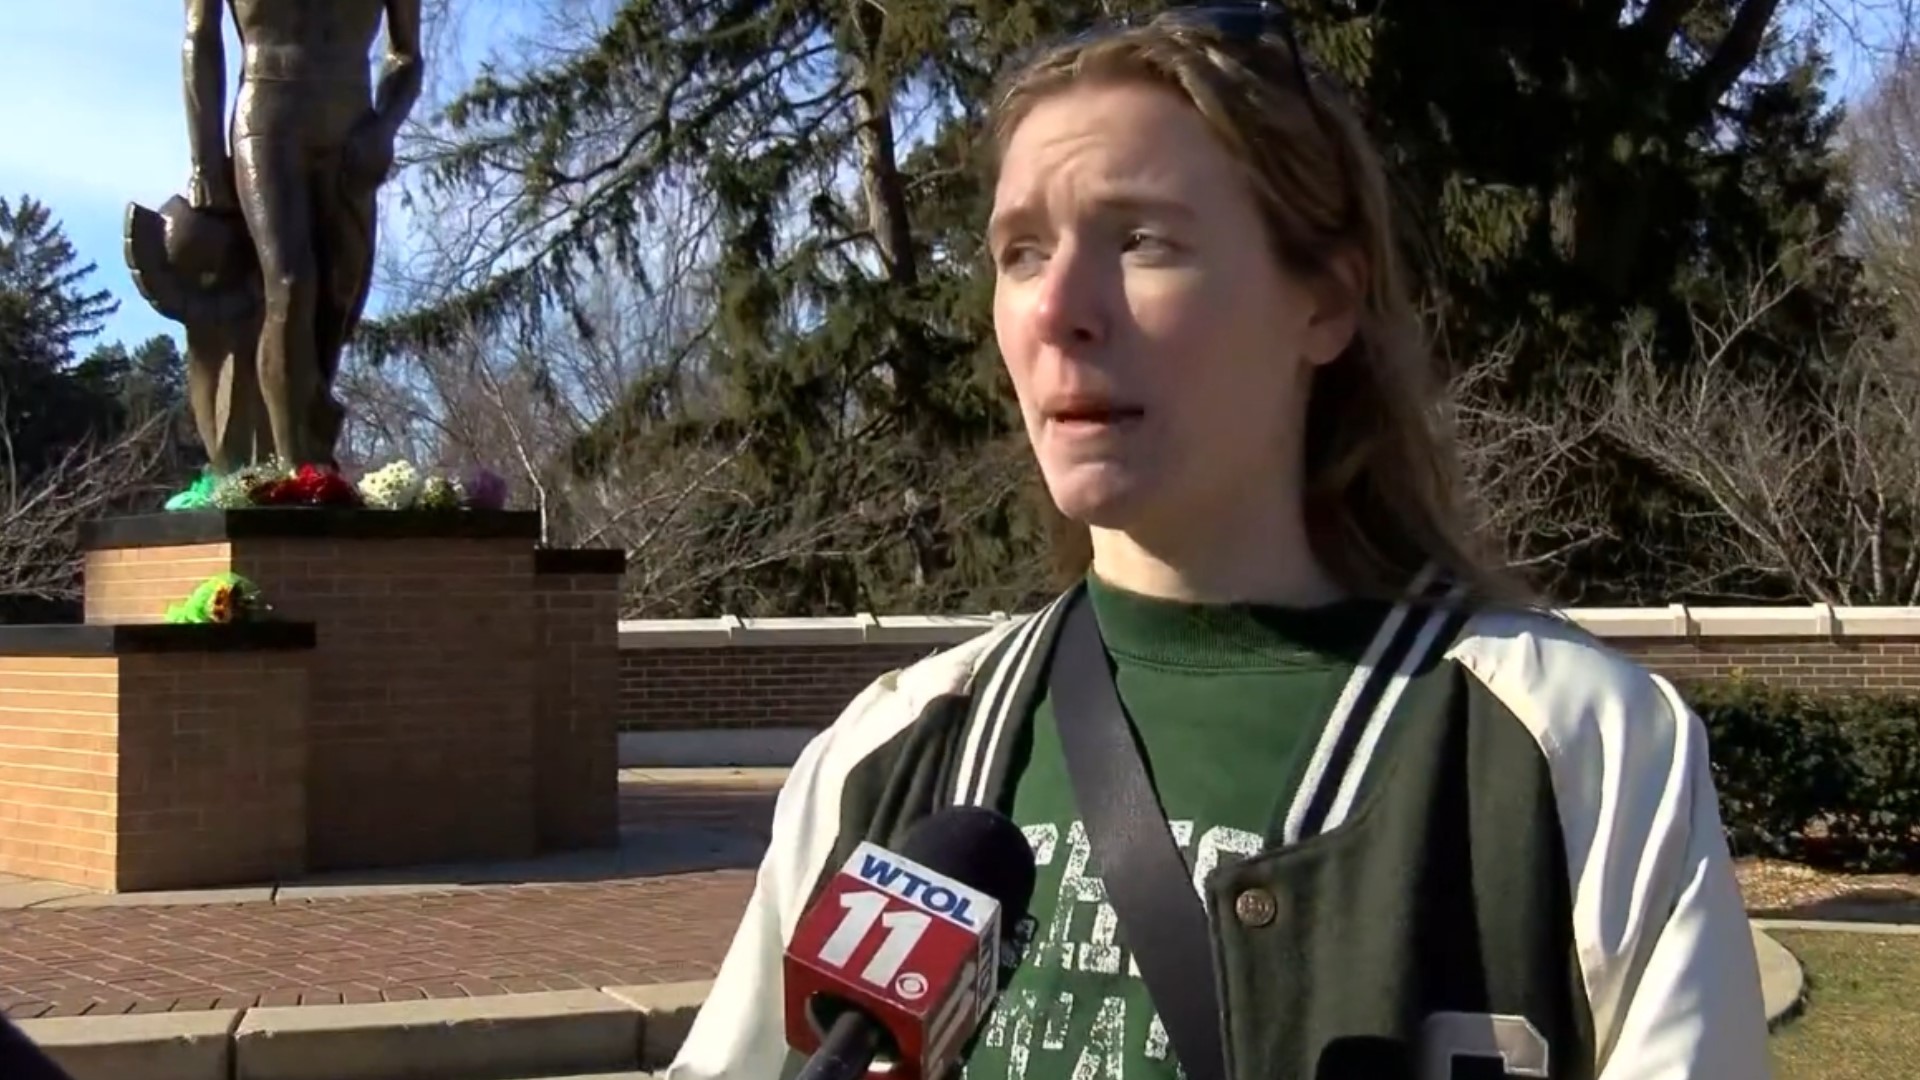 WTOL 11 reporter Kalie Marantette talked to Michigan State University students about their experiences after an armed suspect shot eight students, killing three.